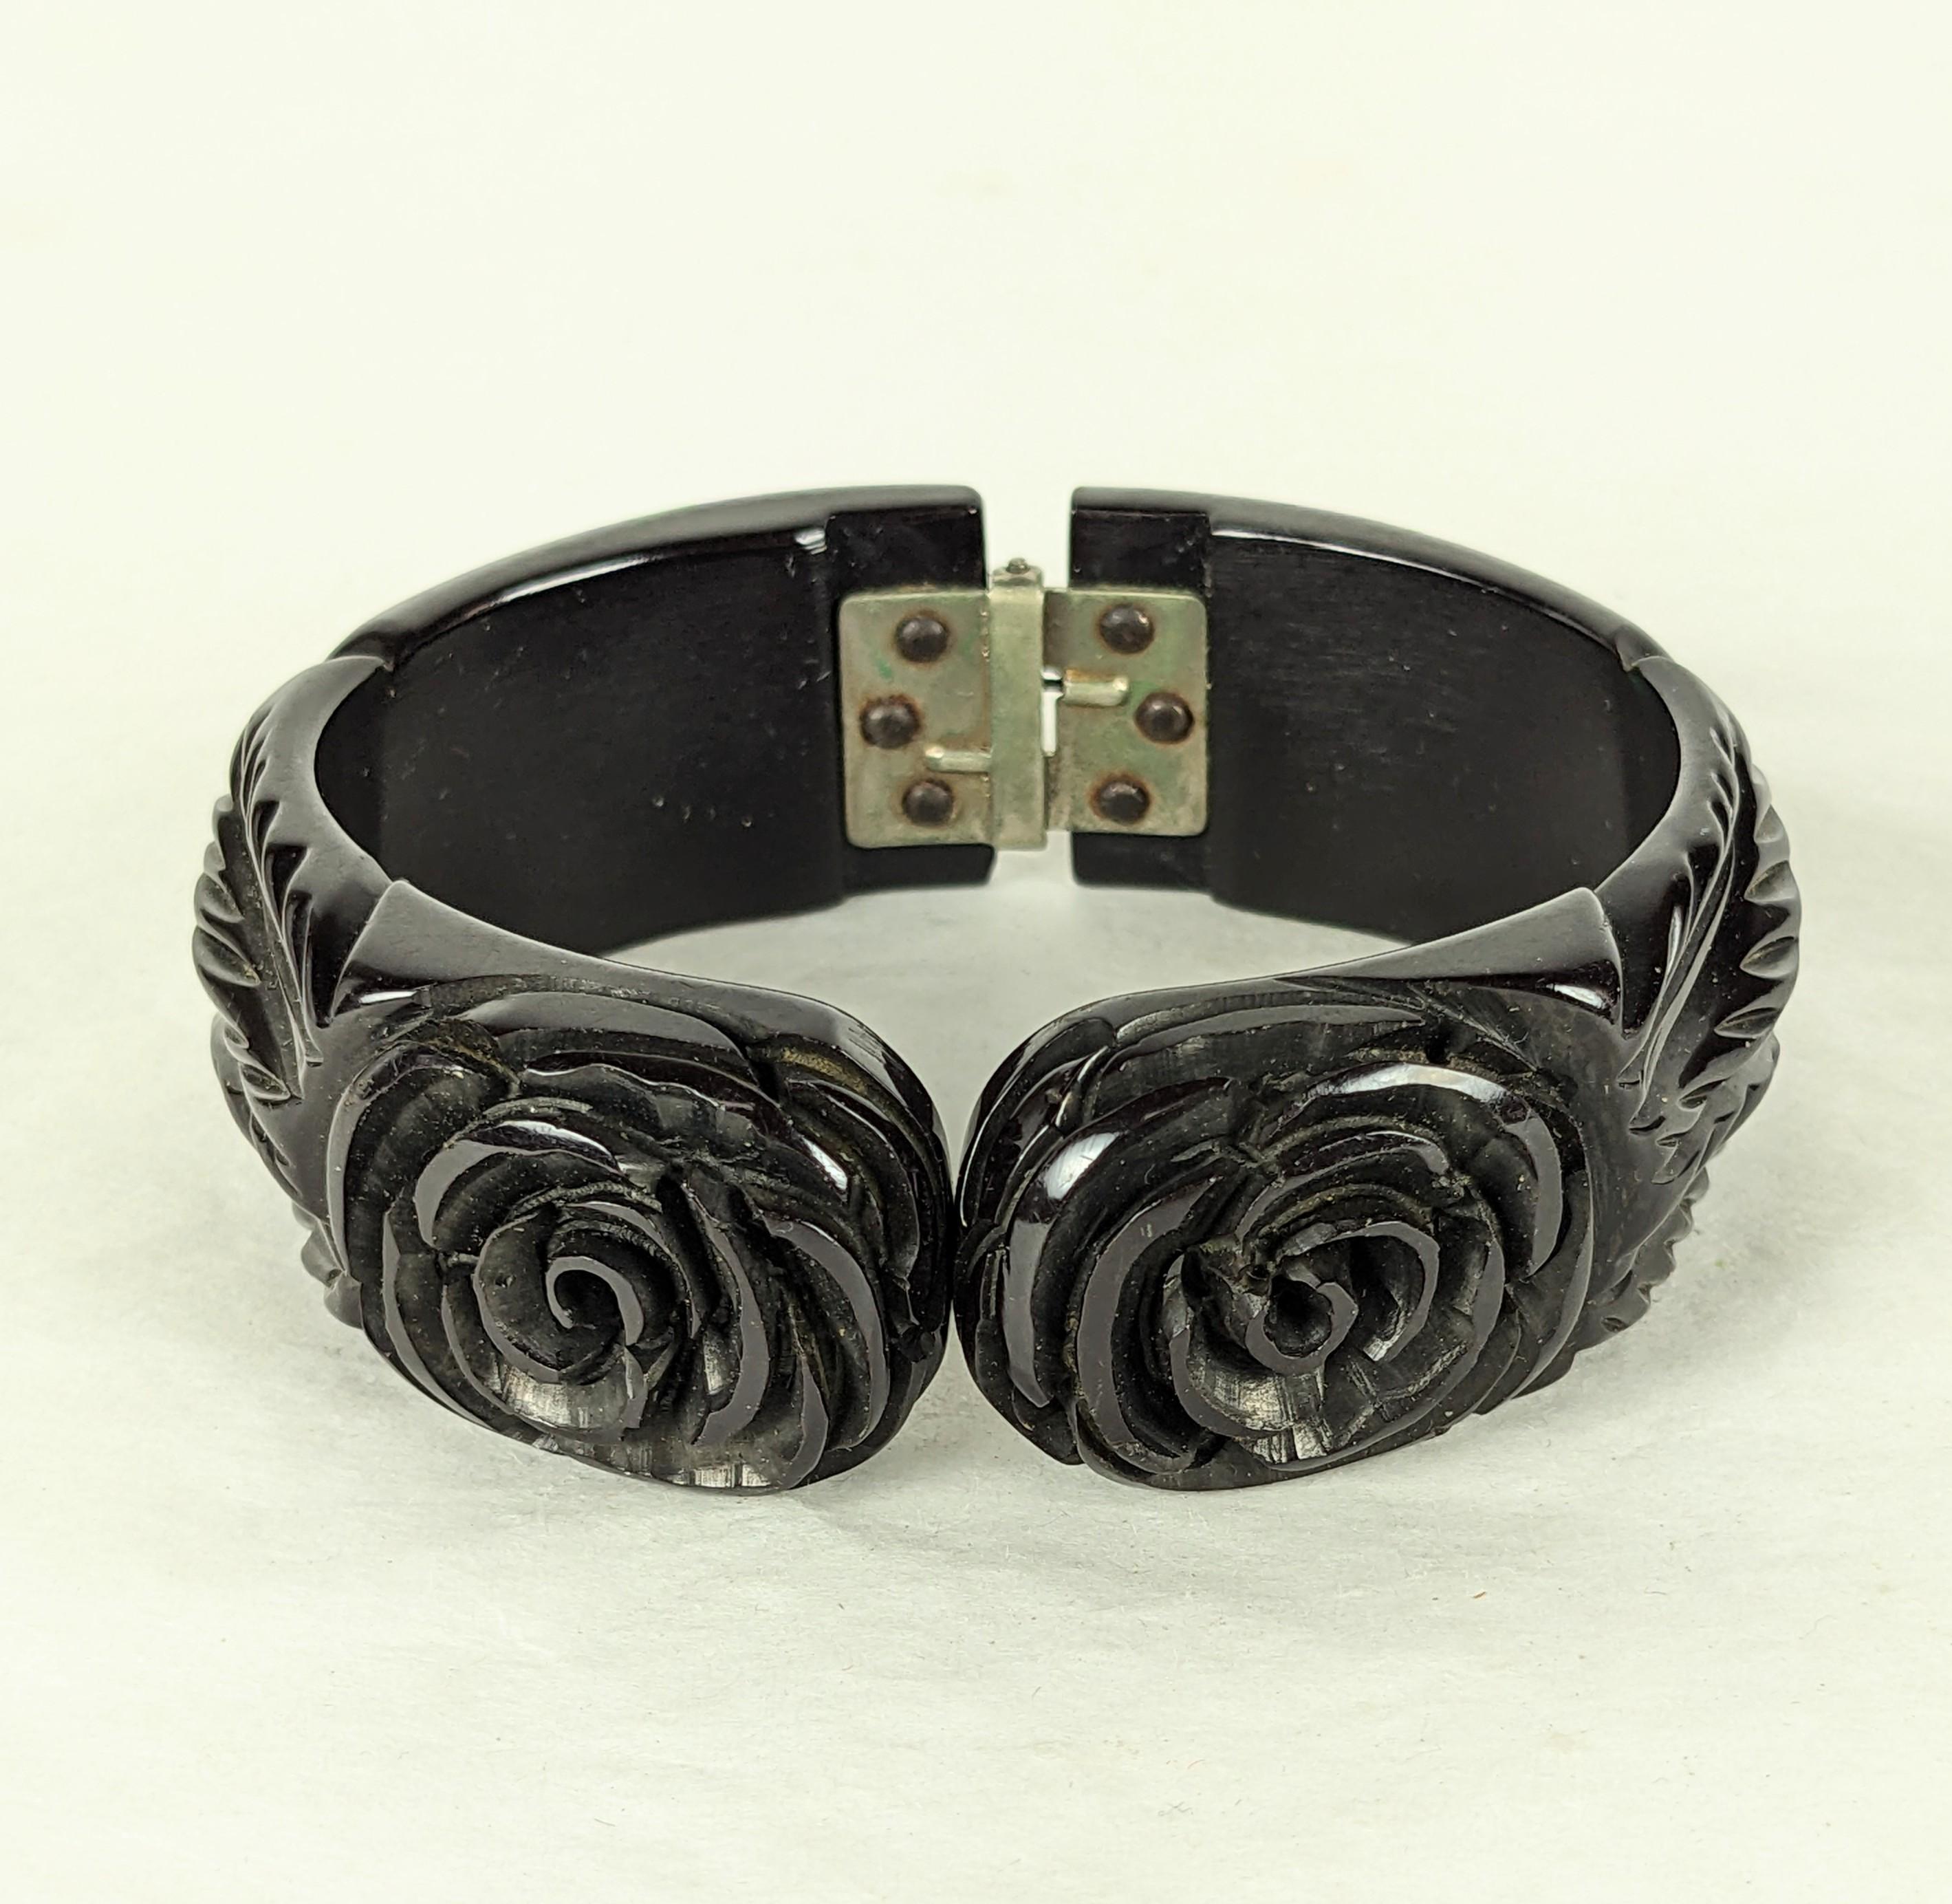 Art Deco Bakelite Carved Rose Clamper Bracelet from the 1920's. Hand carved Black bakelite with 2 flower motifs on top with carved leaves on the shoulders. Hinge on back allows entry. 
1